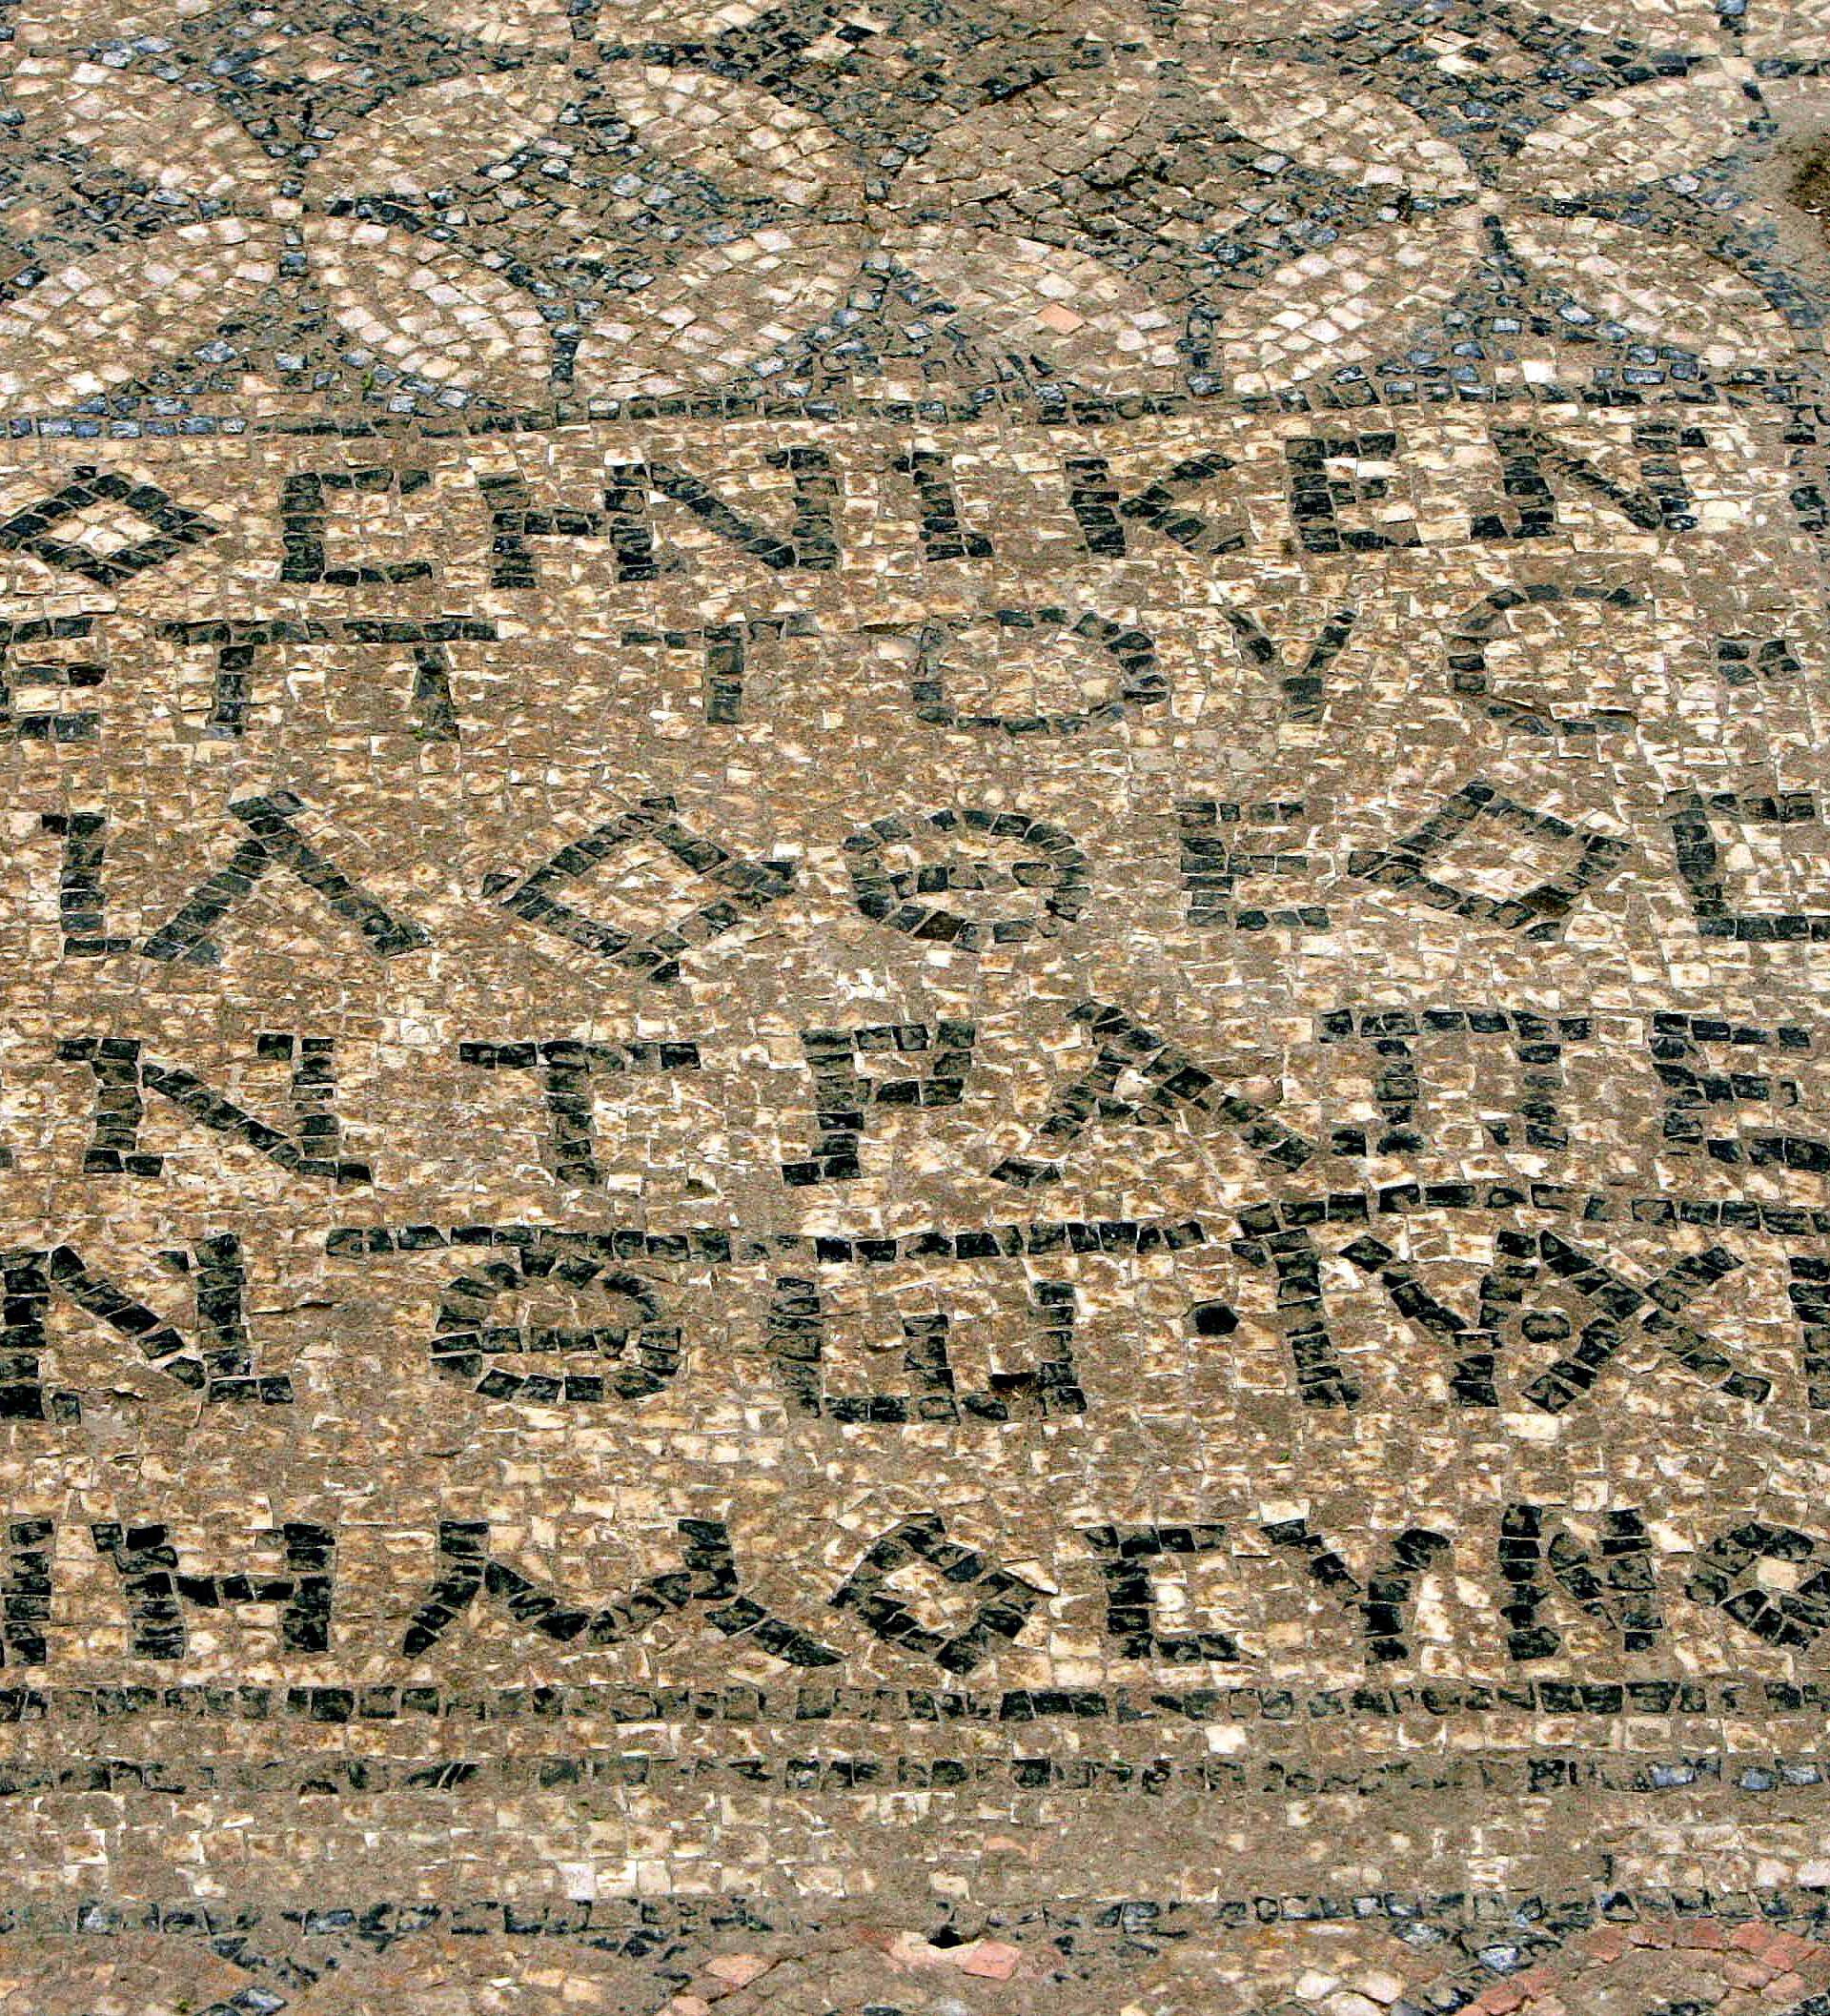 FILE PHOTO: Ancient Greek inscription mentioning Jesus is seen on a mosaic on the floor of ancient prayer hall that was discovered on the site of Megiddo Prison